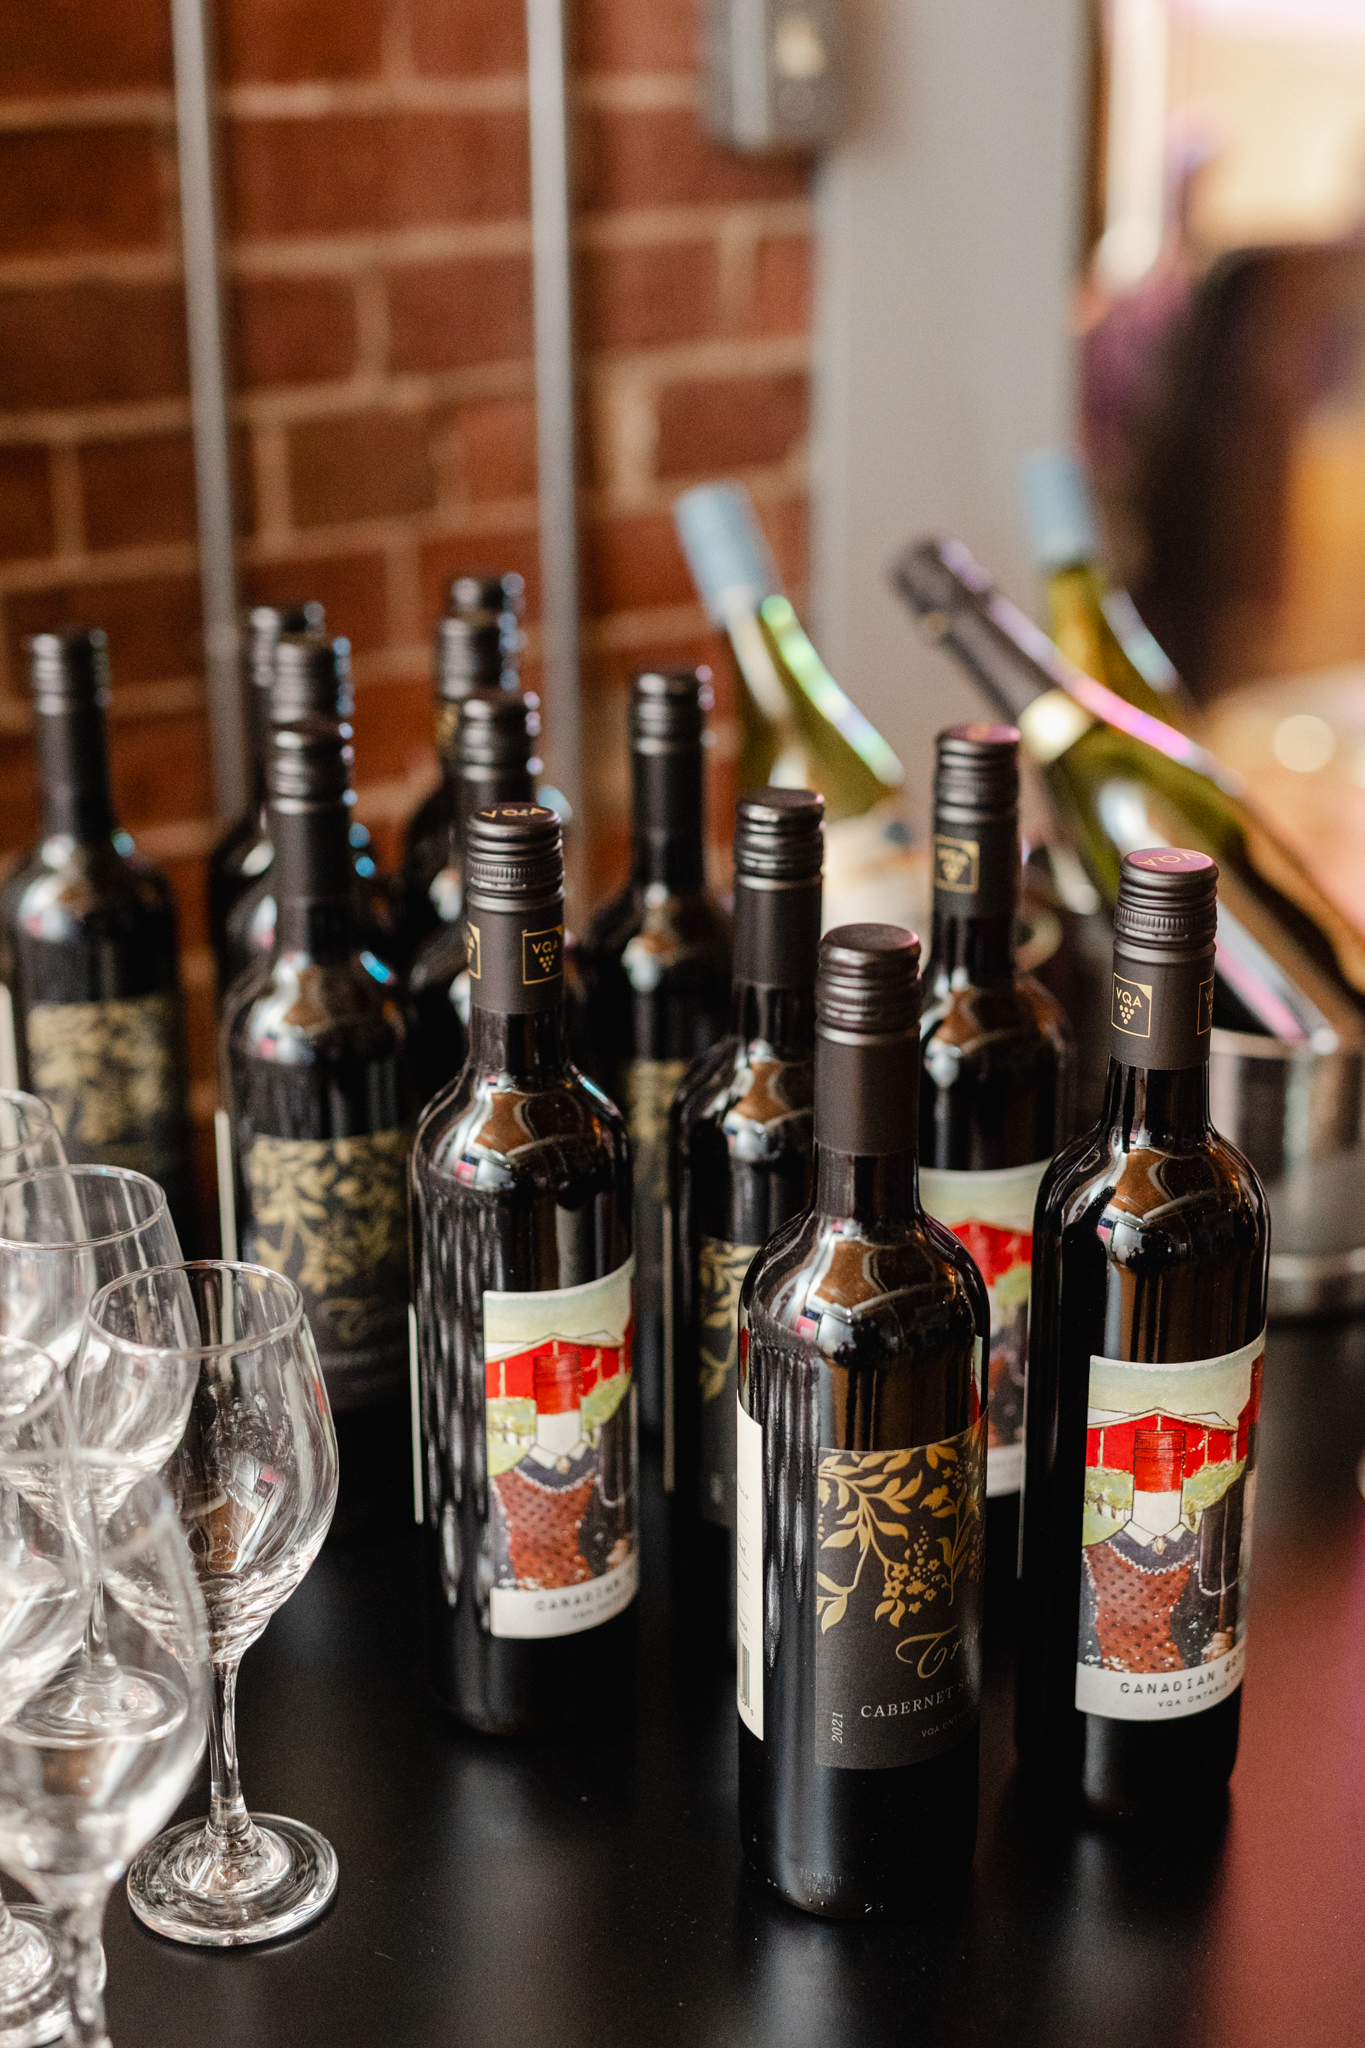 The bottles of wine are elegantly arranged on a table at the event, ready to be captured by an event photographer.